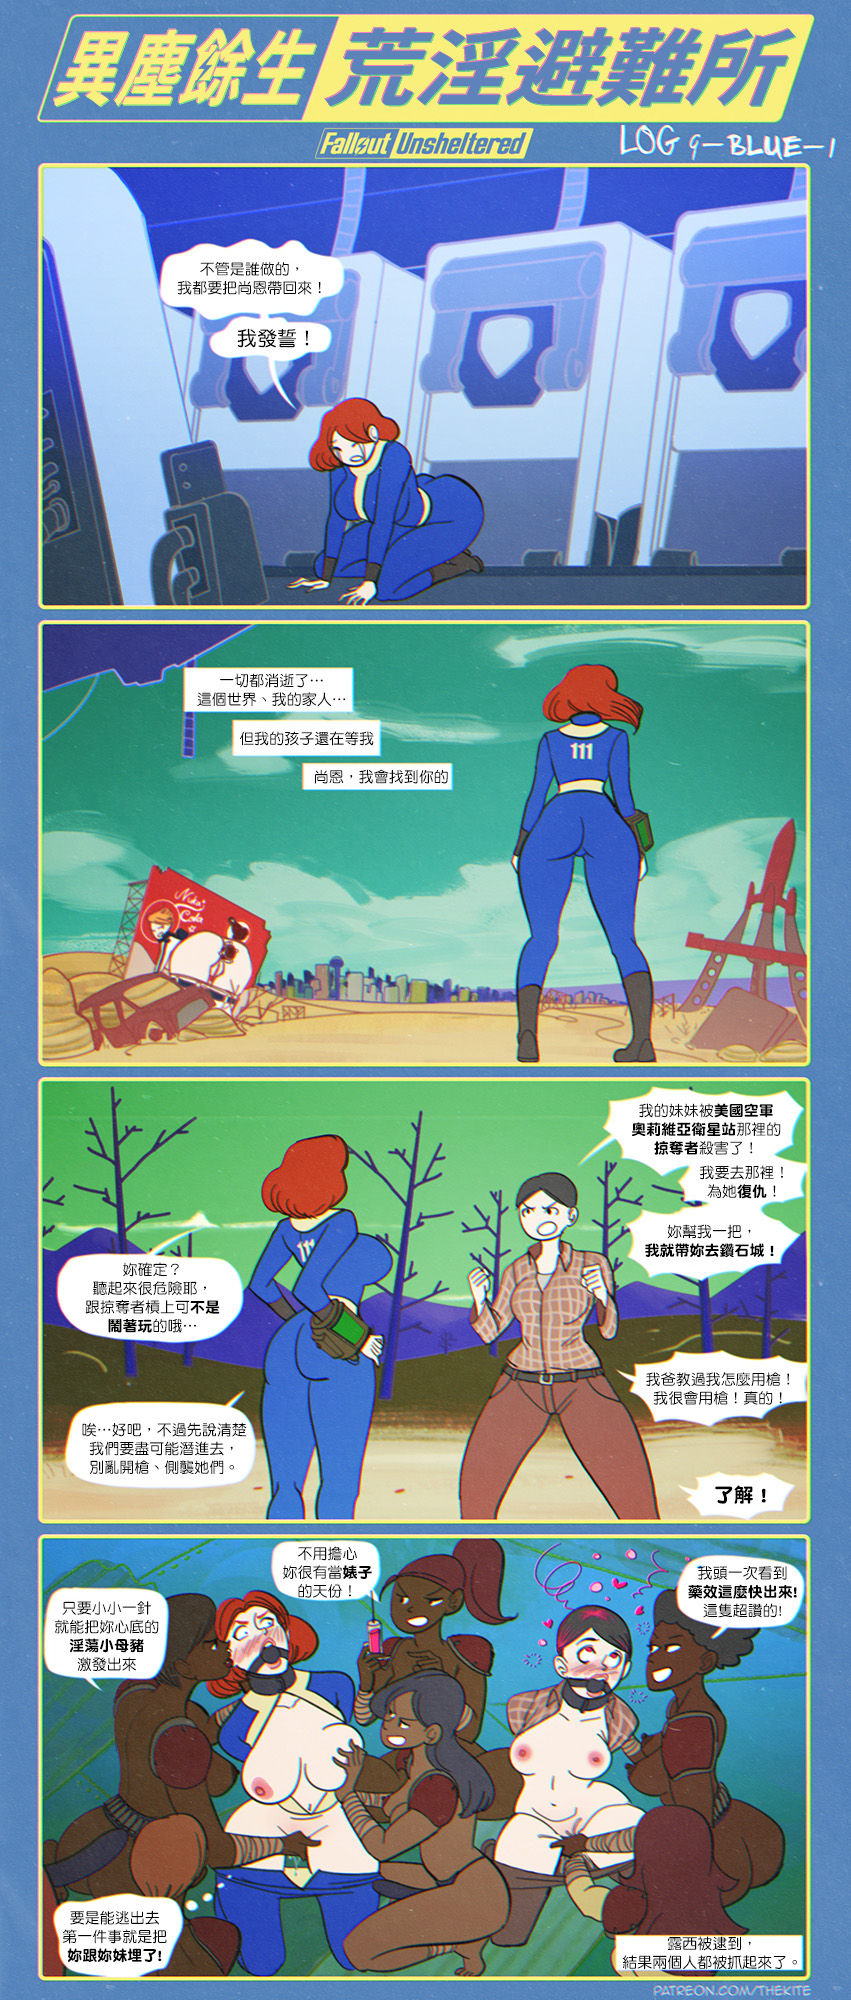 [TheKite] Fallout Unsheltered | 異塵餘生：荒淫避難所  (Fallout)[Ongoing][Chinese][變態浣熊漢化組] 